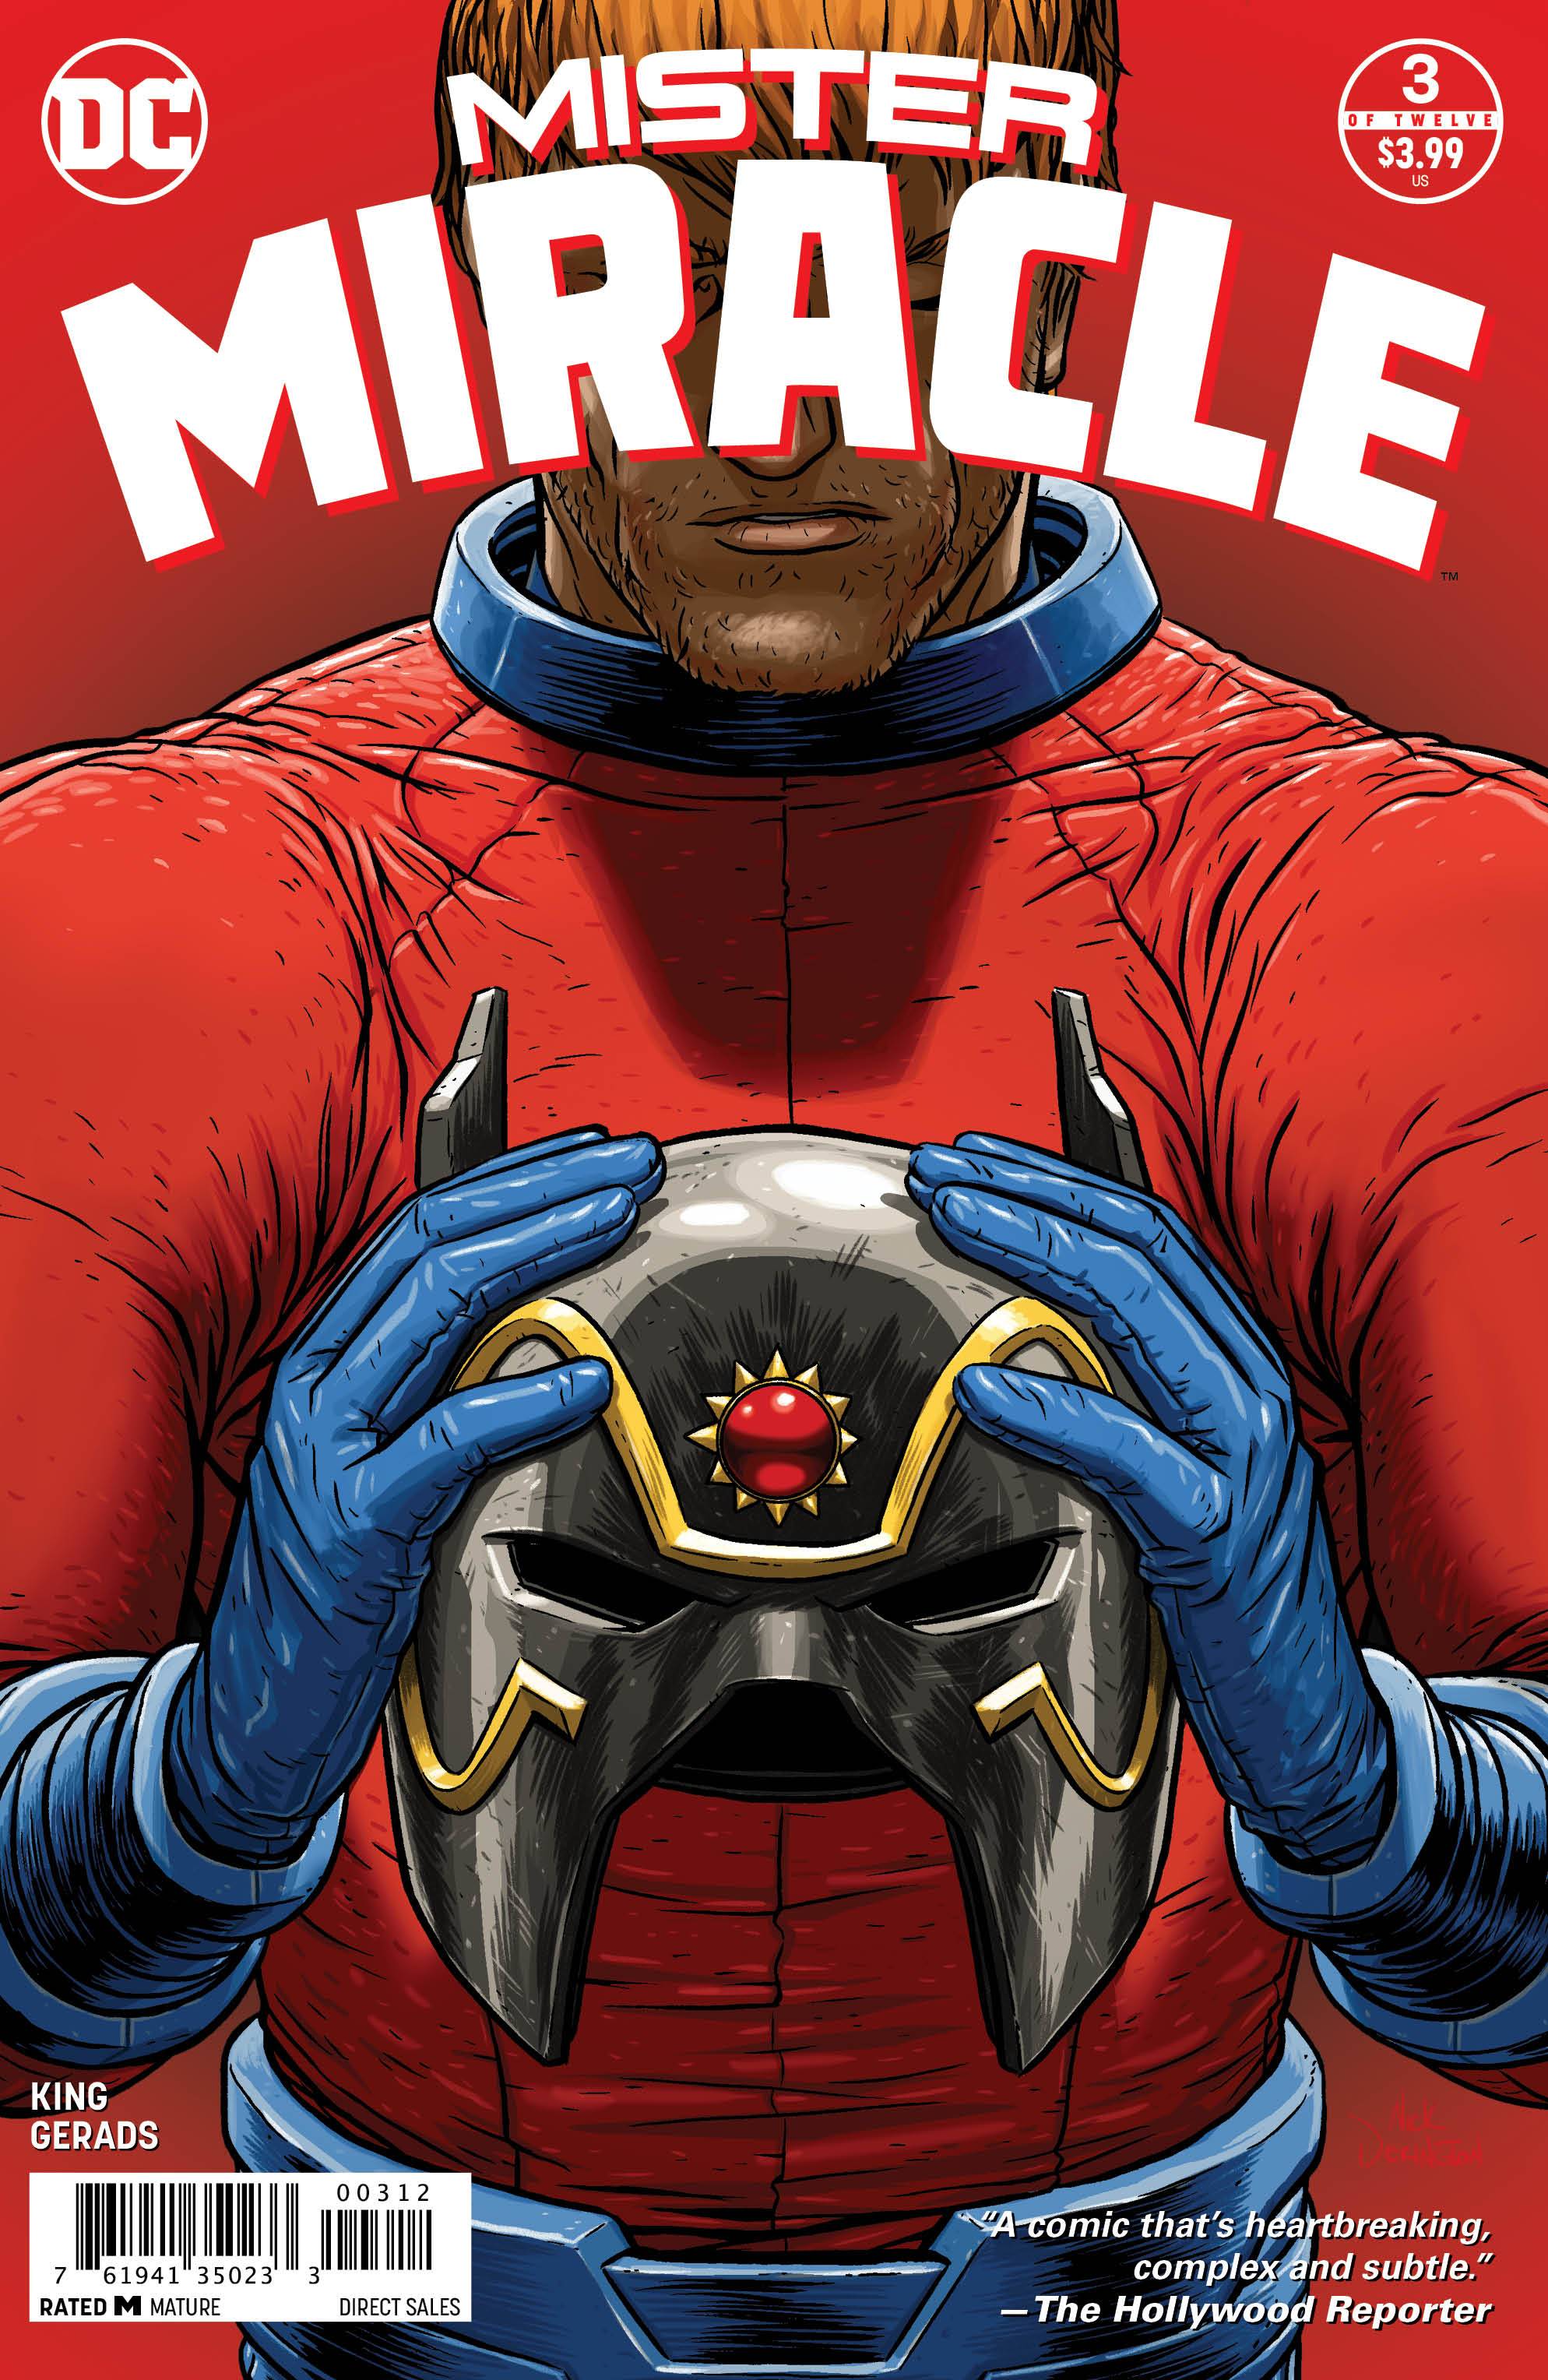 MISTER MIRACLE #3 (OF 12) 2ND PTG (MR) 02/17/18 RD